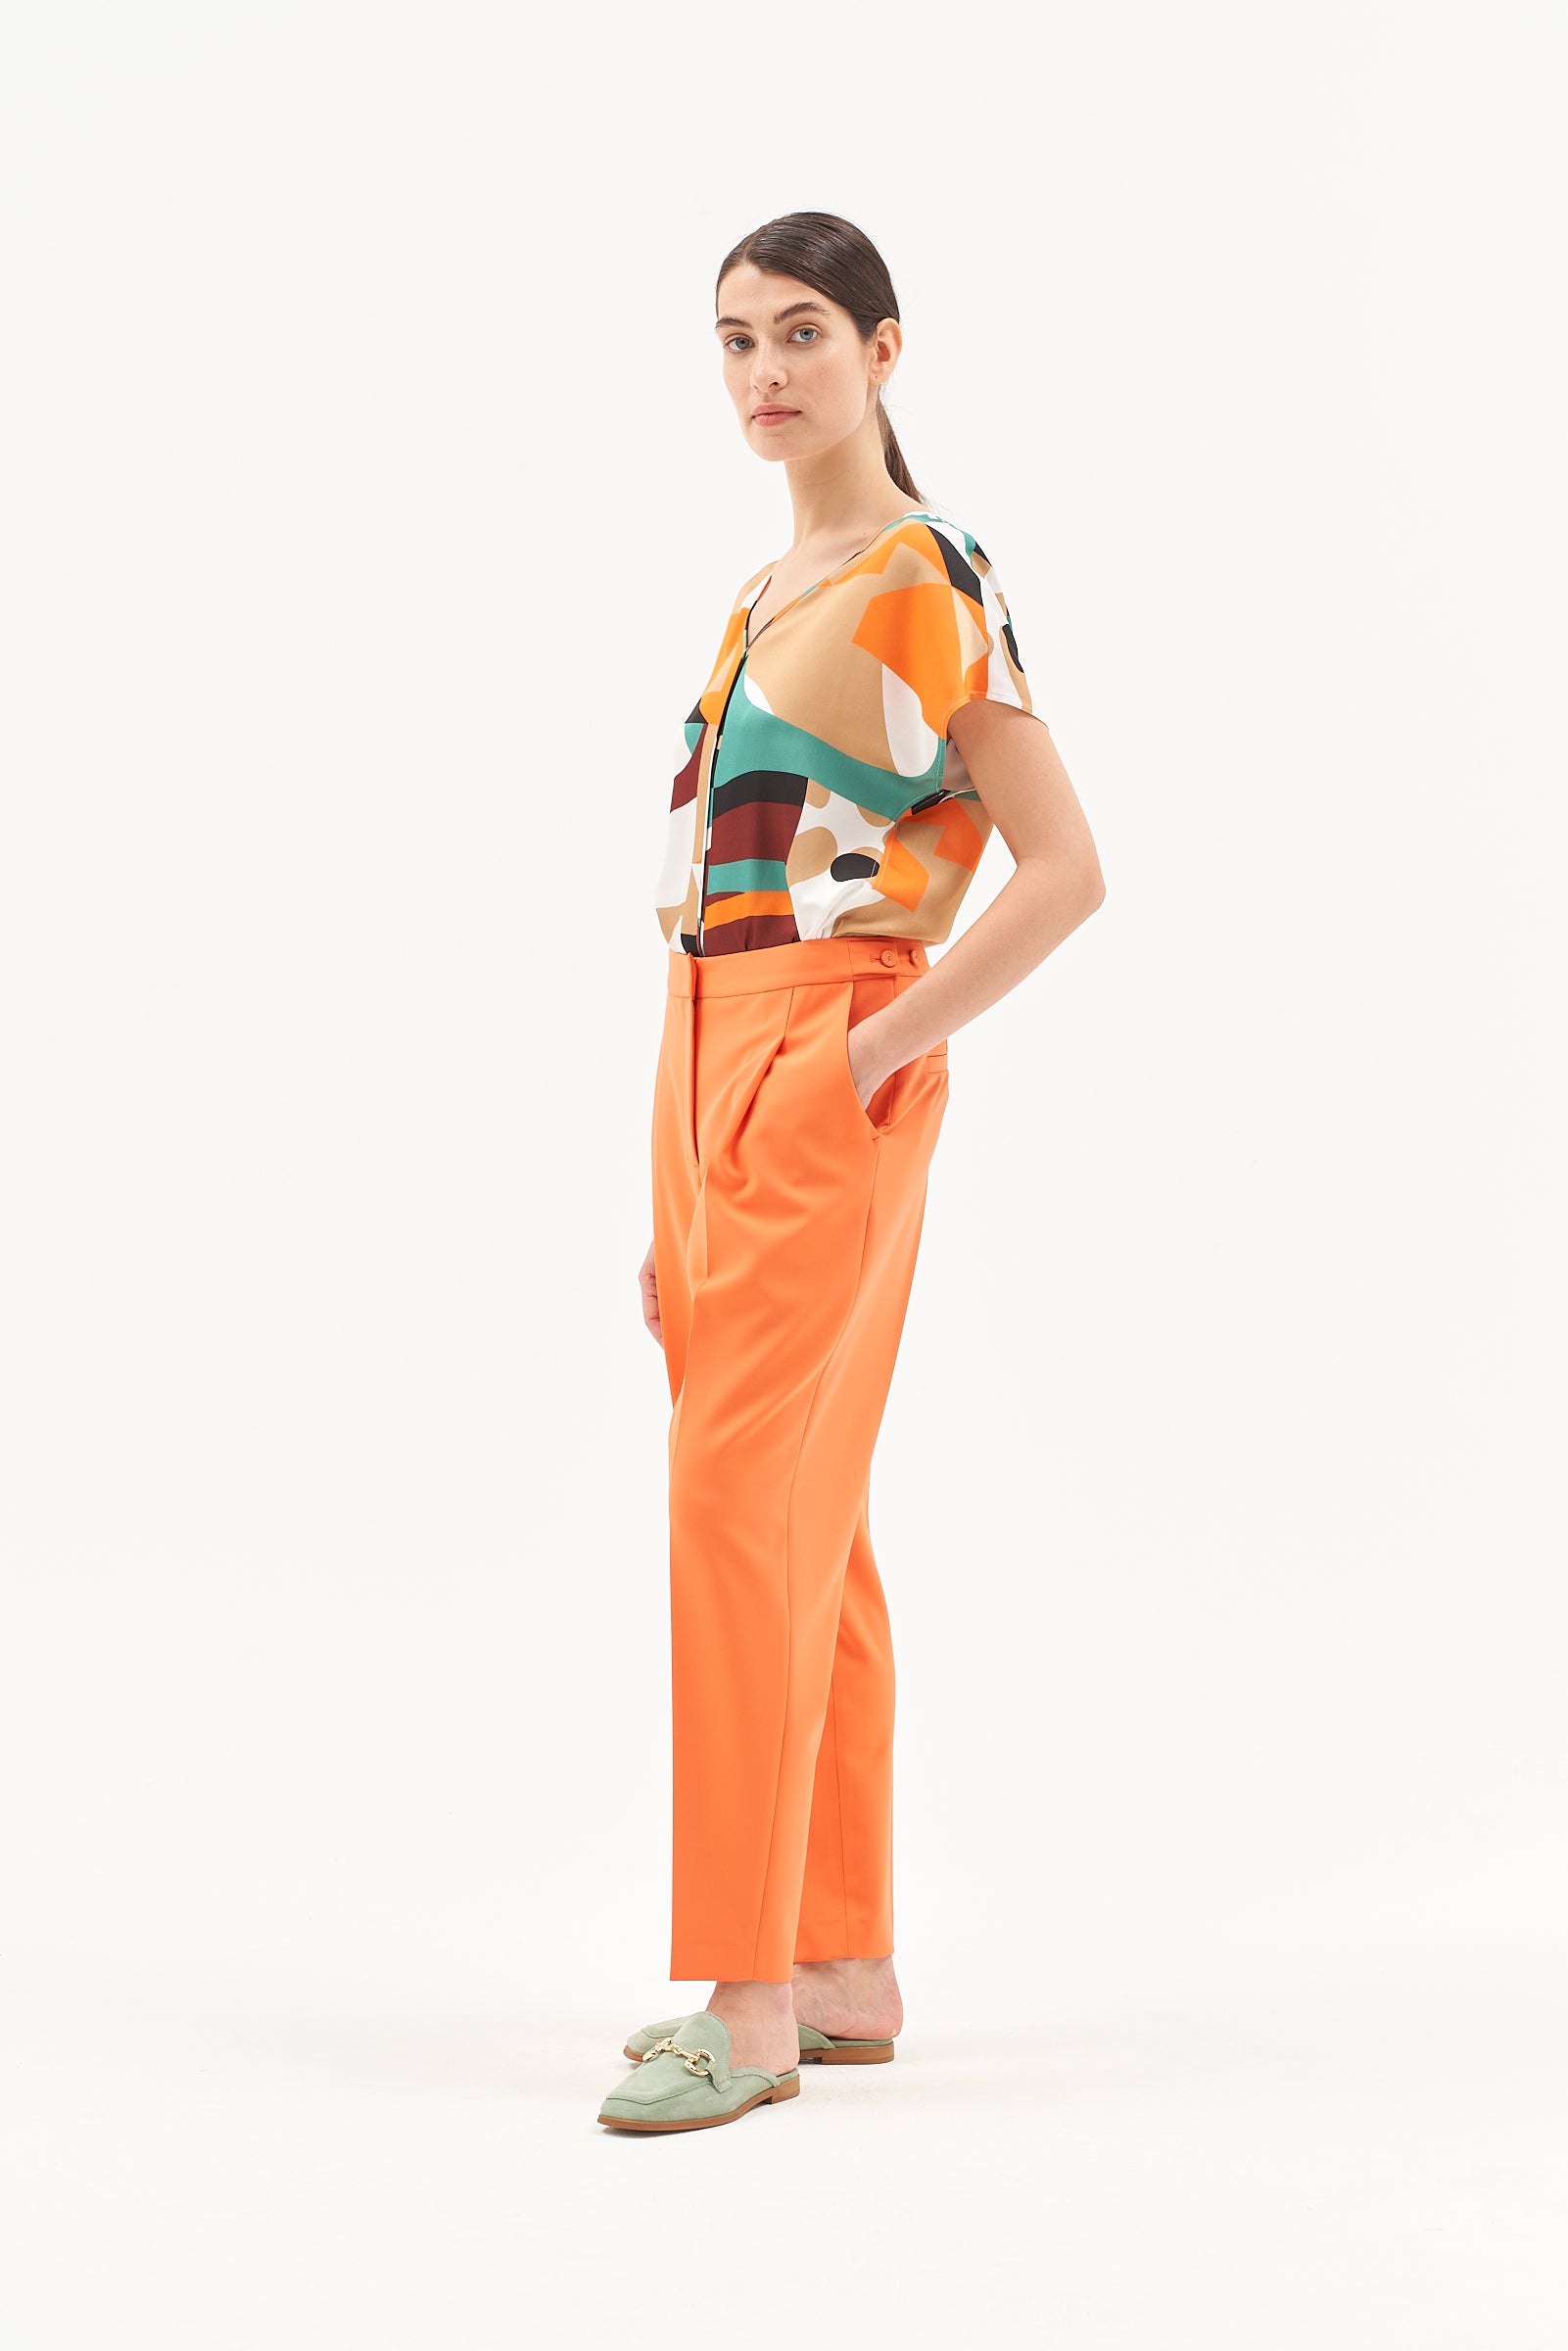 PLEAT FRONT TAPERED TROUSERS ORANGE